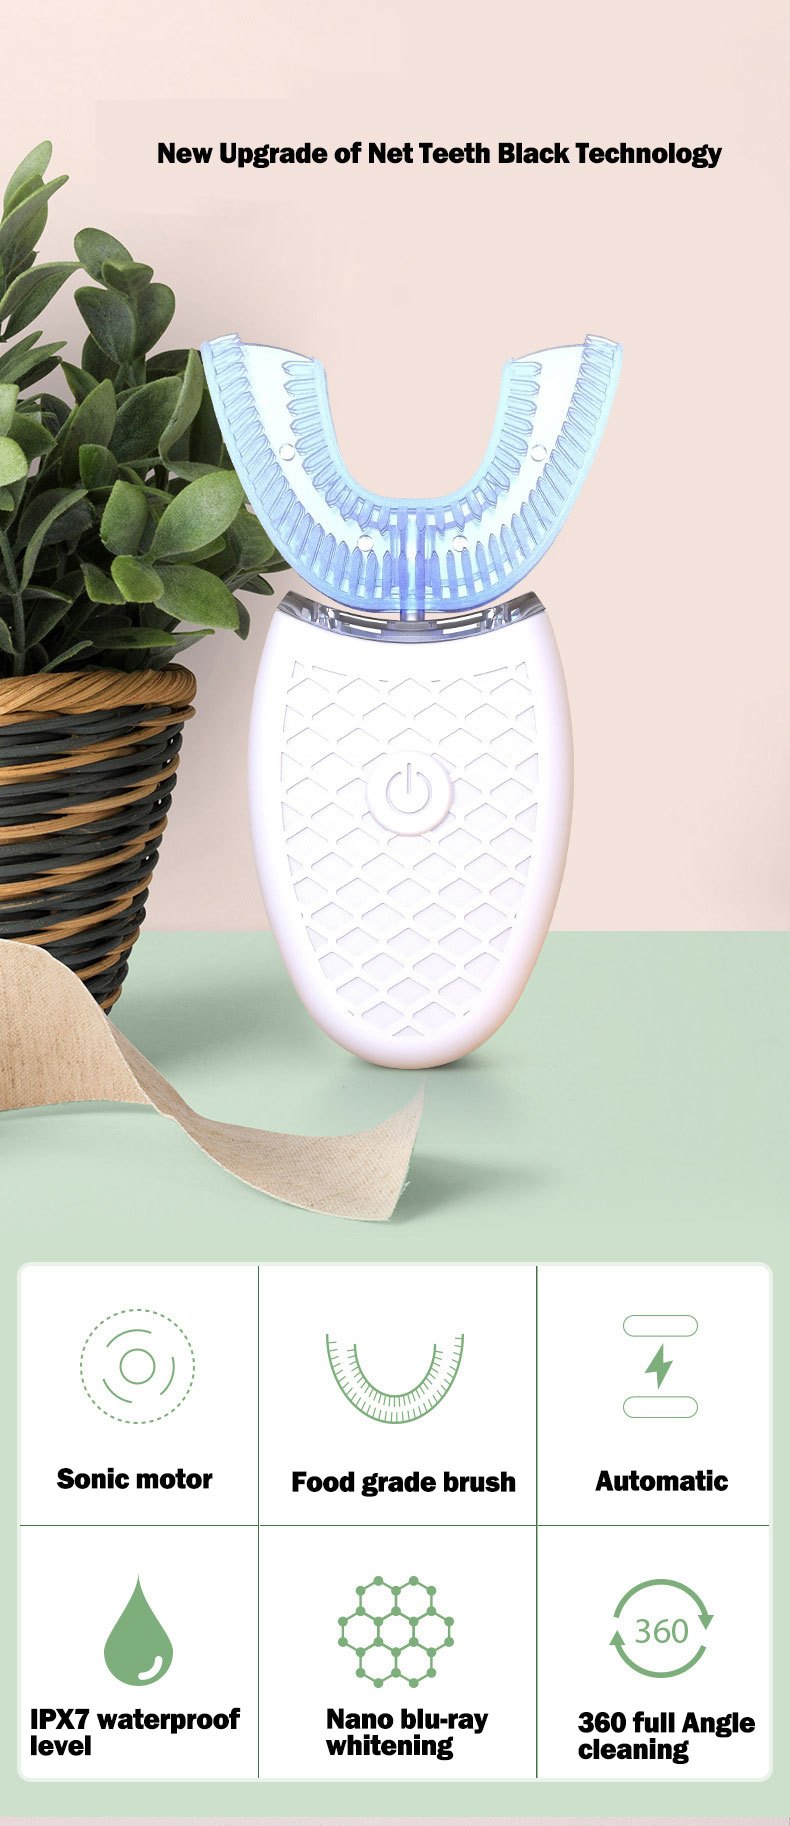 revolutionize your oral hygiene with the electric ultrasonic u shaped toothbrush 360 mouth cleansing led light waterproof ipx7 certified 3 cleansing modes whole mouth whitening details 0